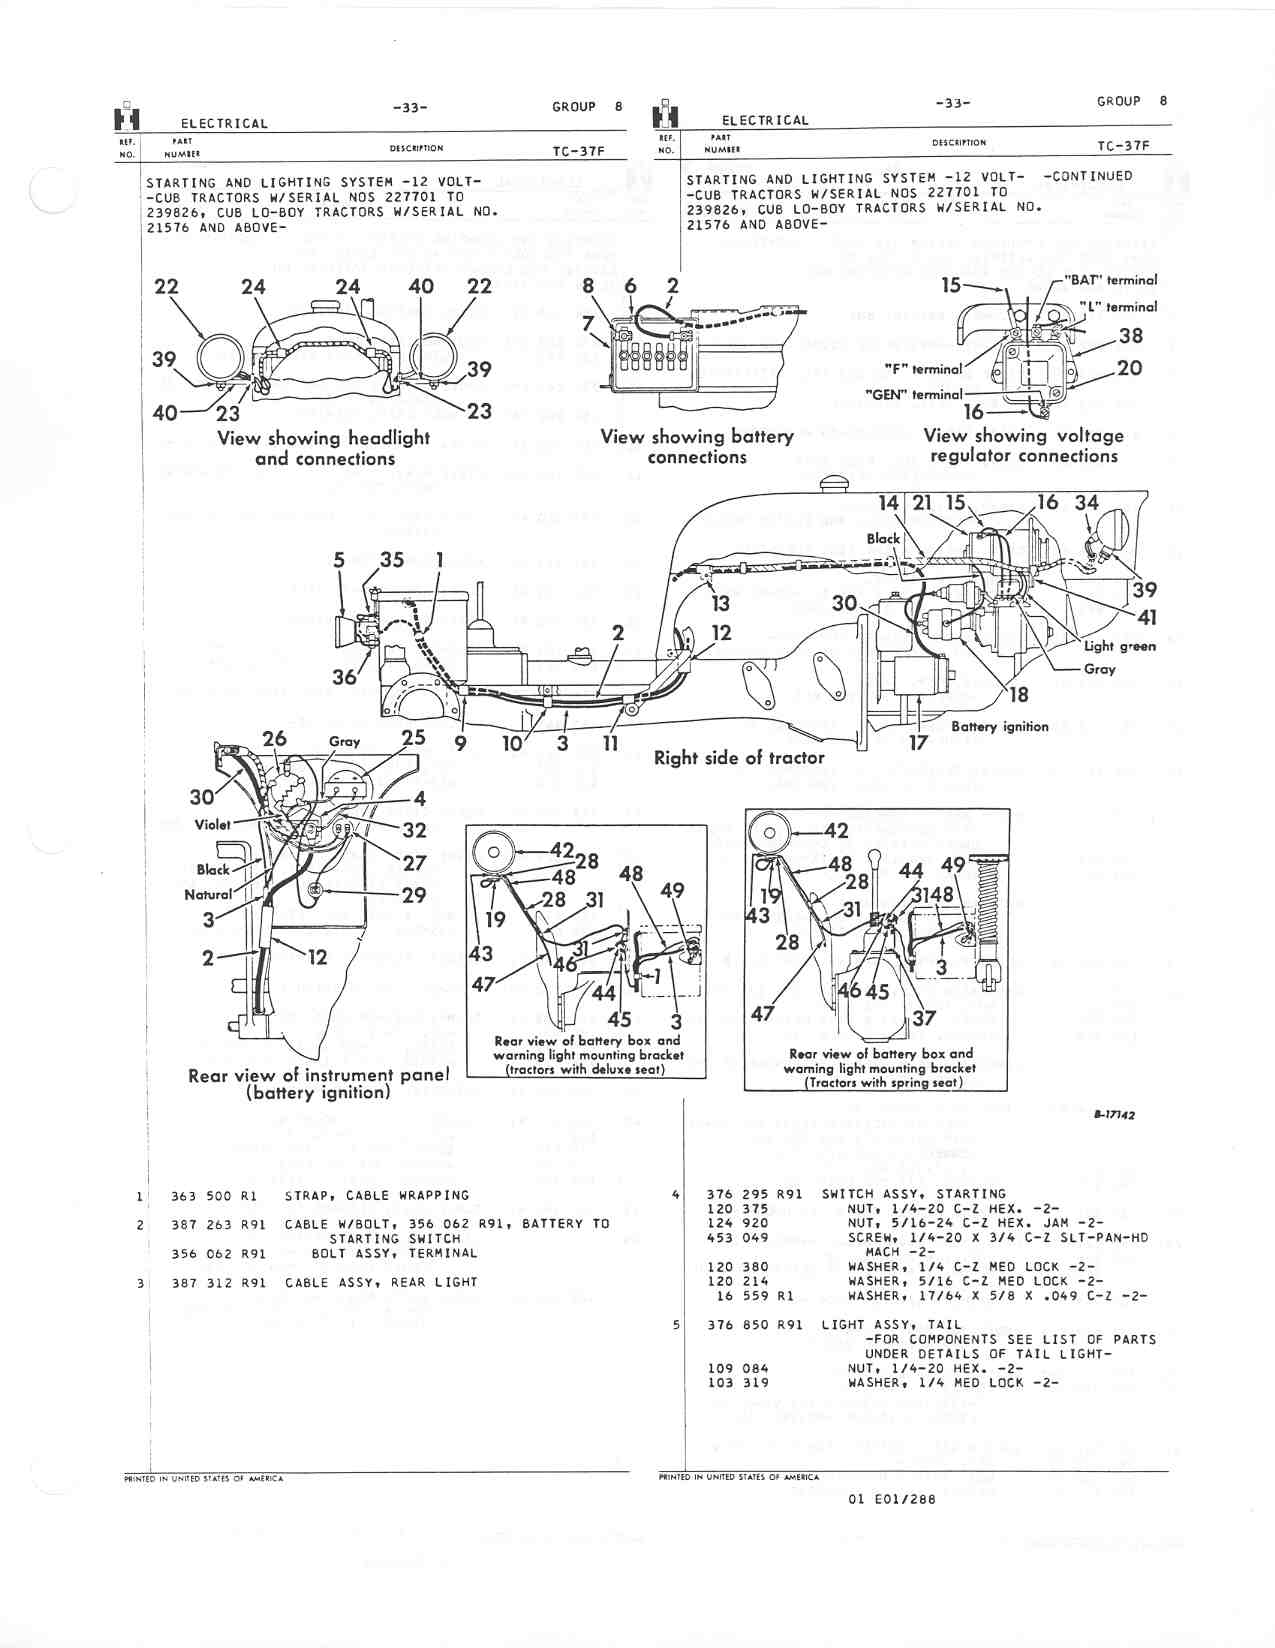 hvc 6600 wiring diagram ignition